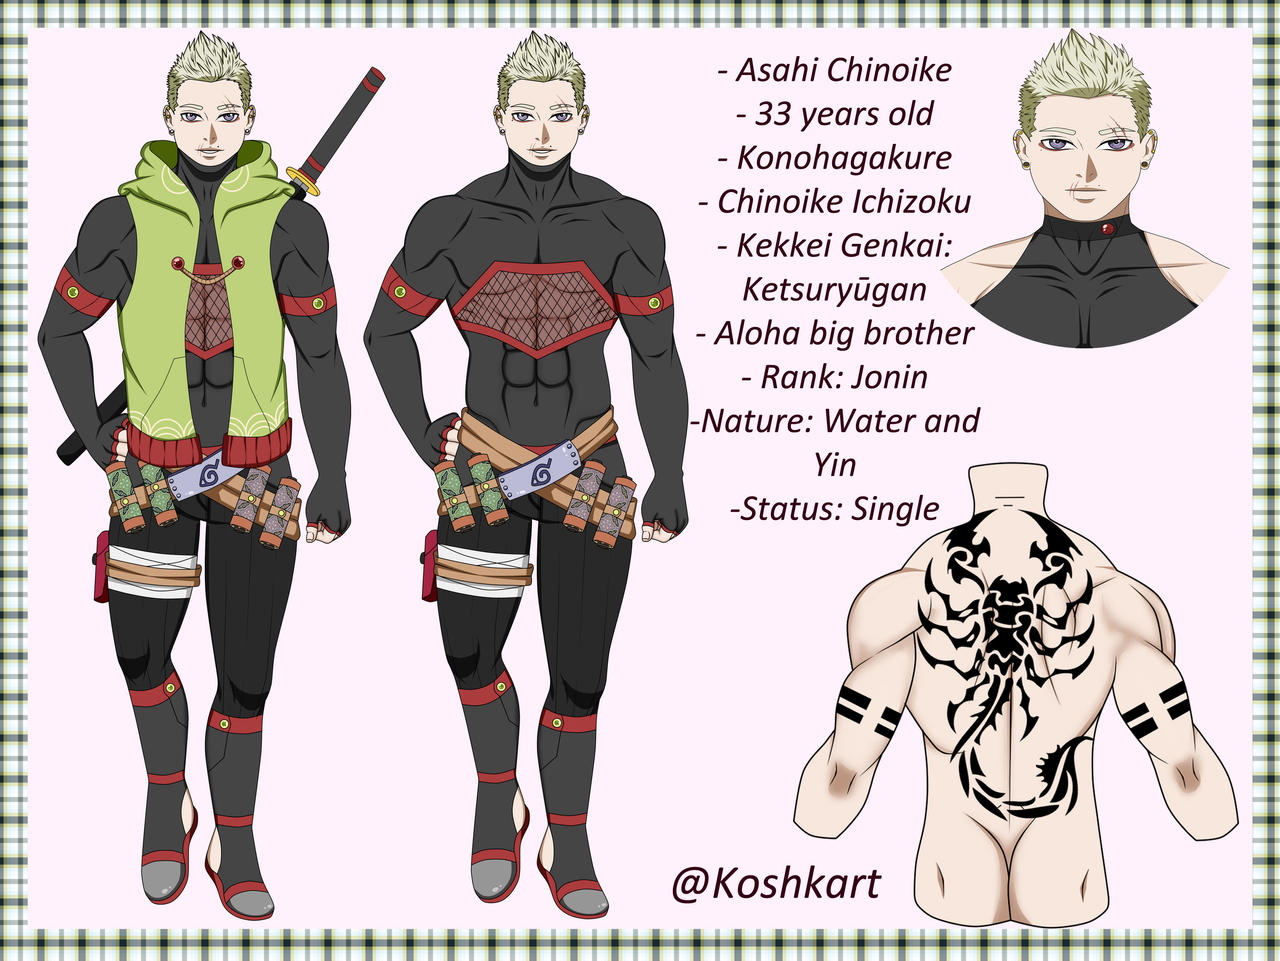 Who is Chino in Naruto?